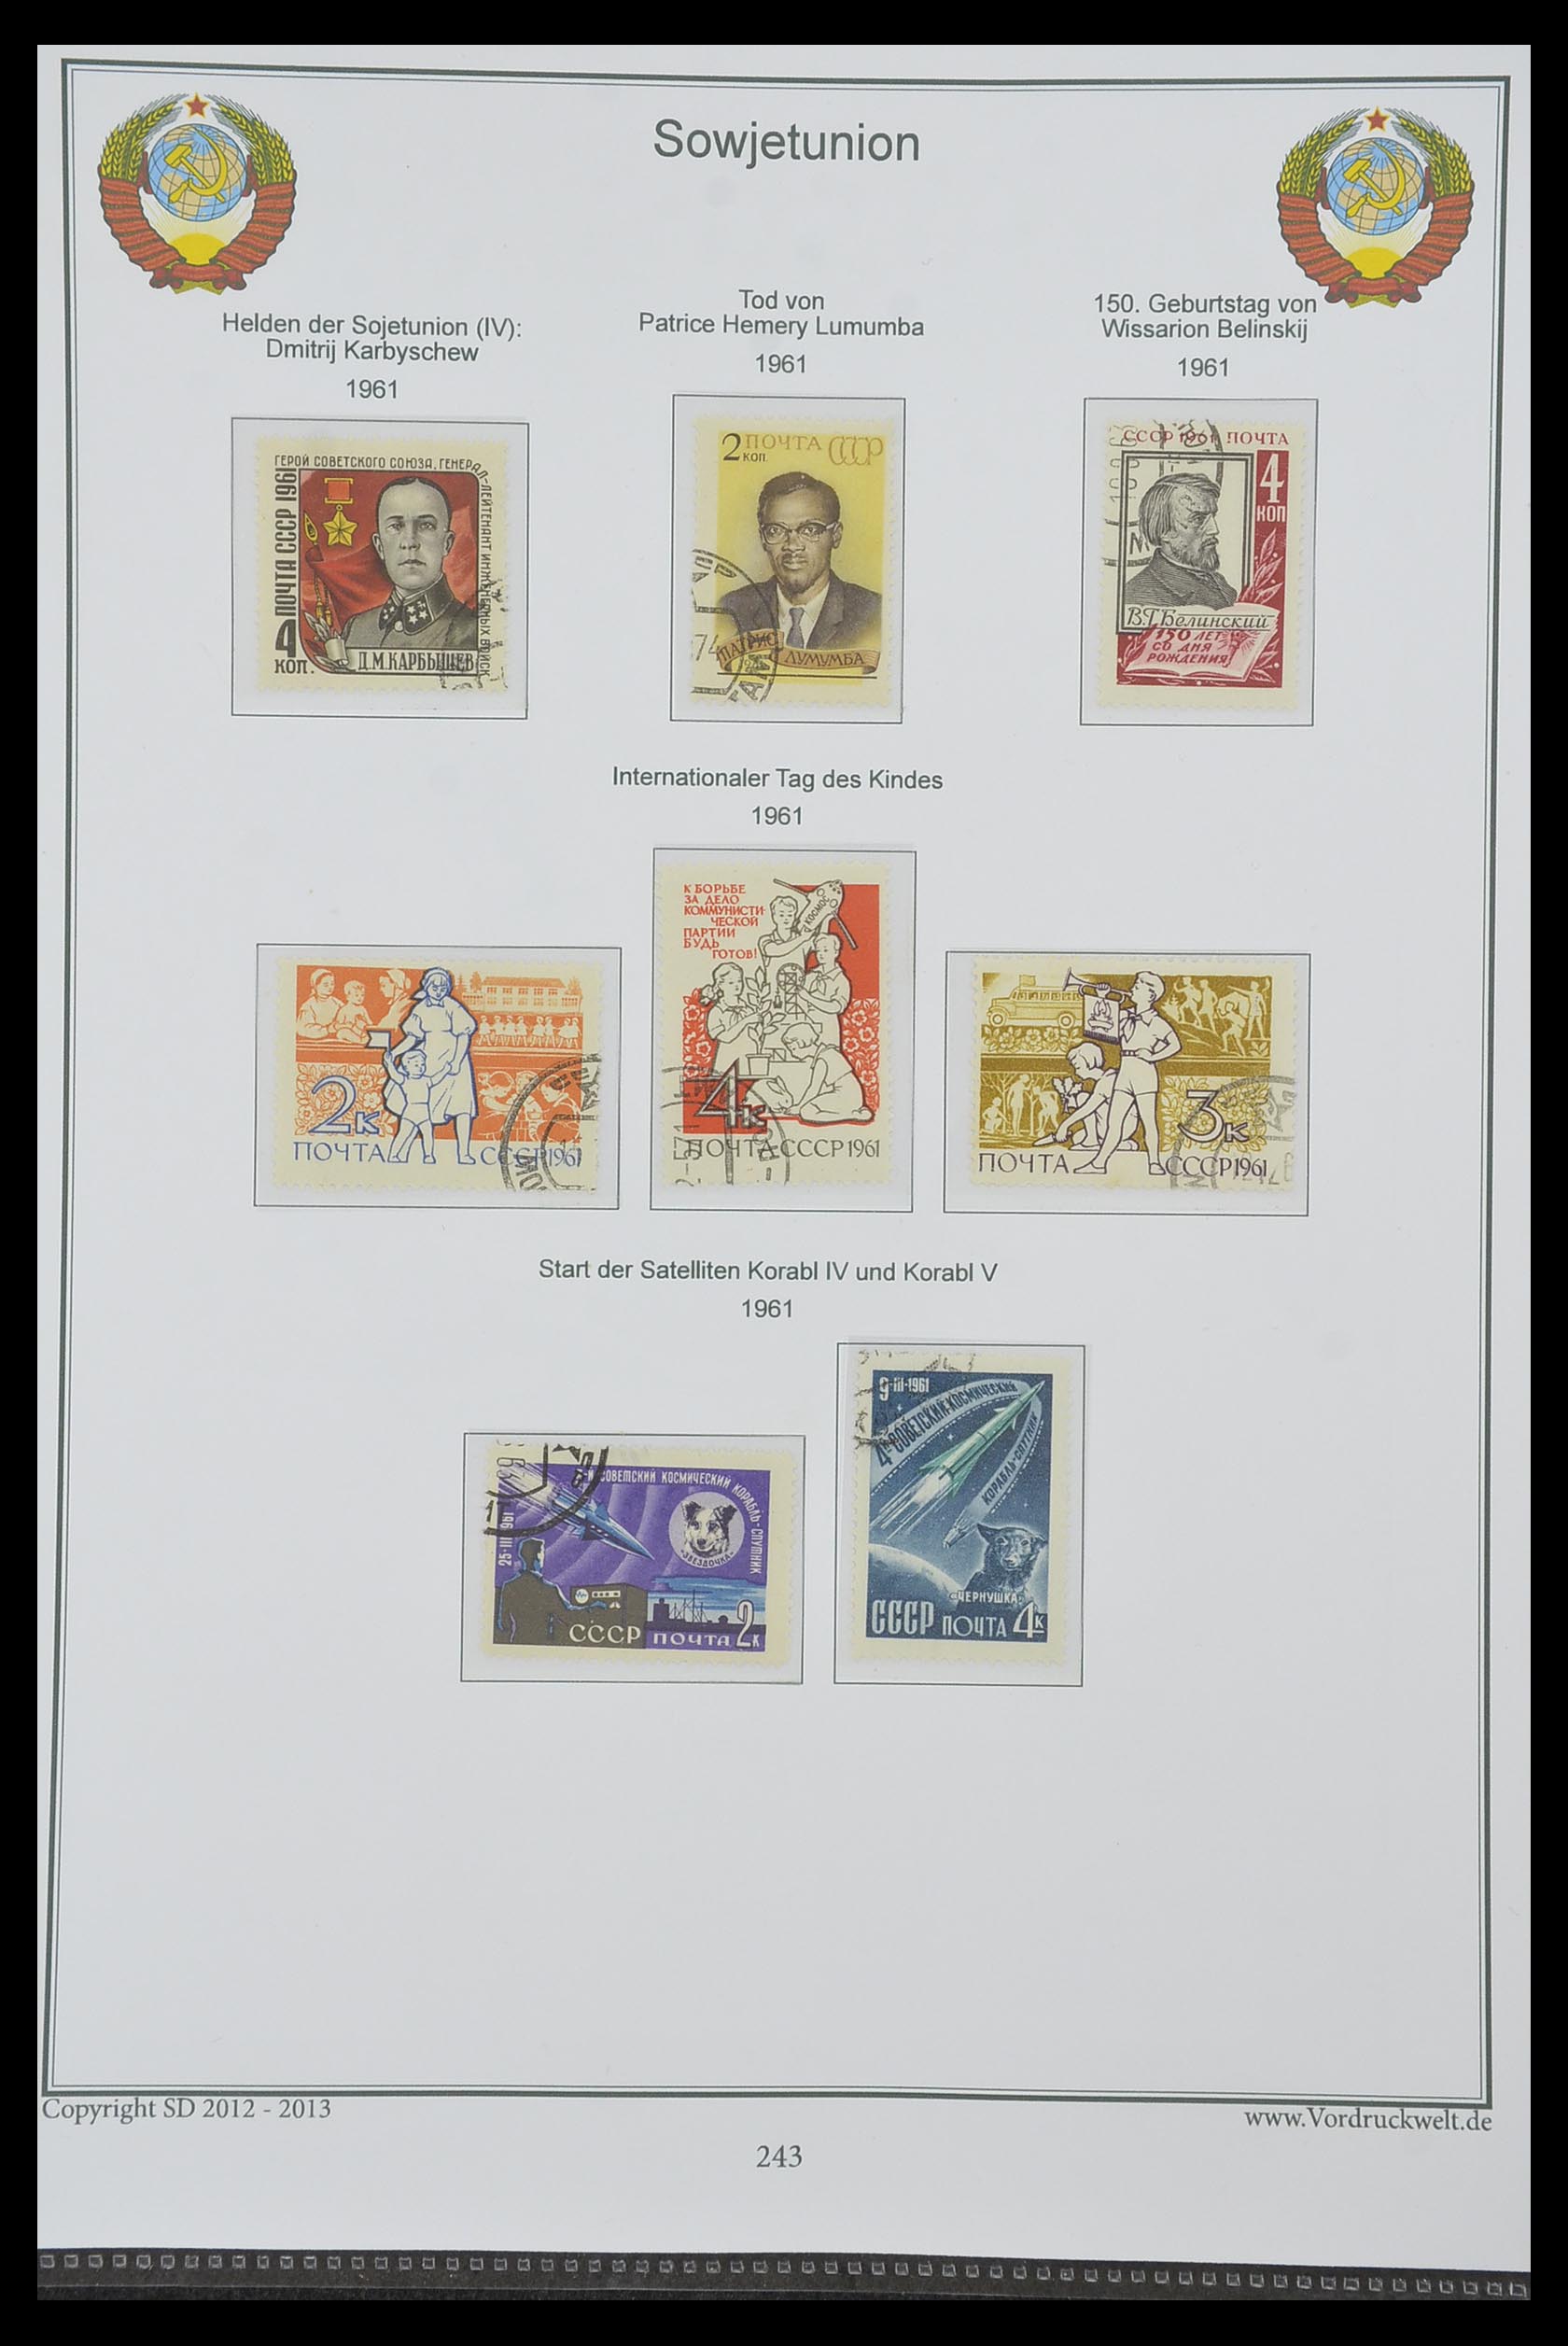 33974 247 - Stamp collection 33974 Russia 1858-1998.